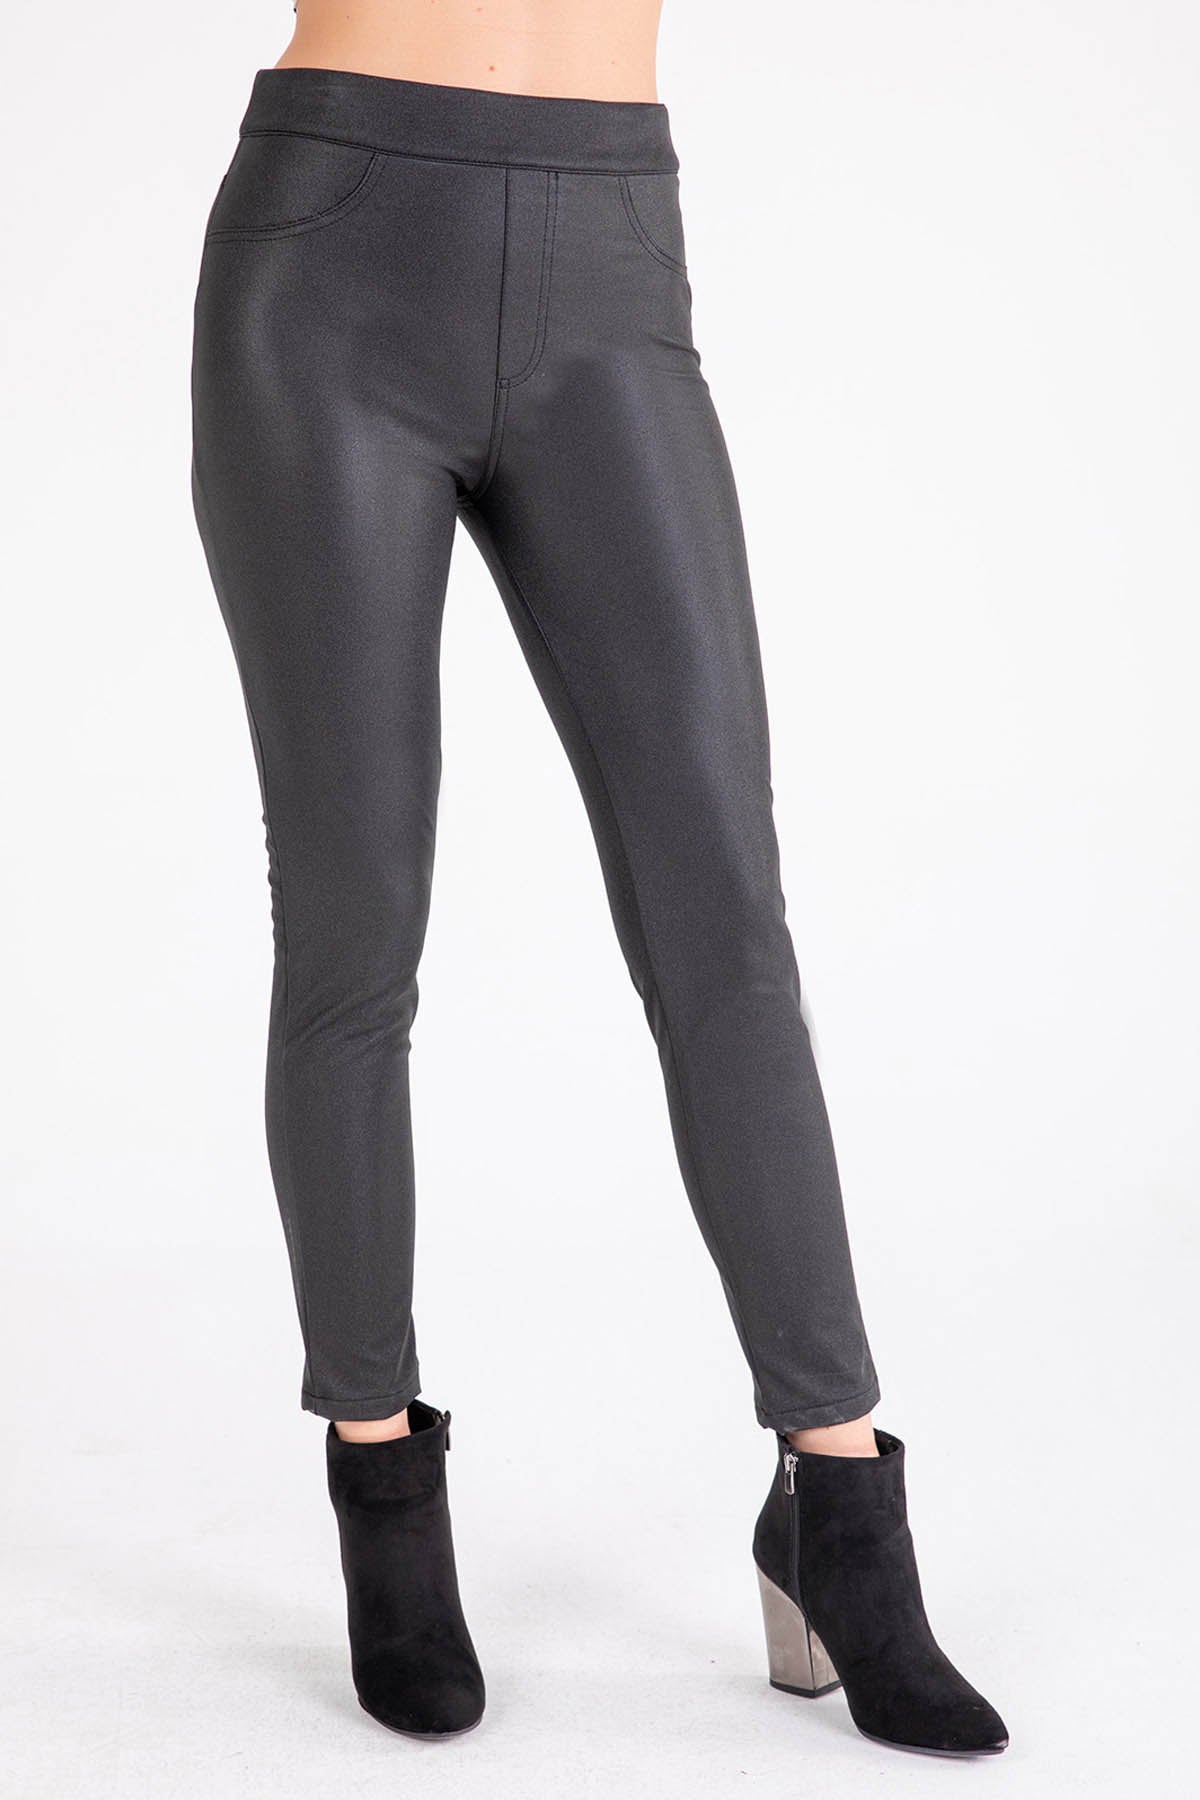 The Ultimate 4-Pocket Pant in Greco